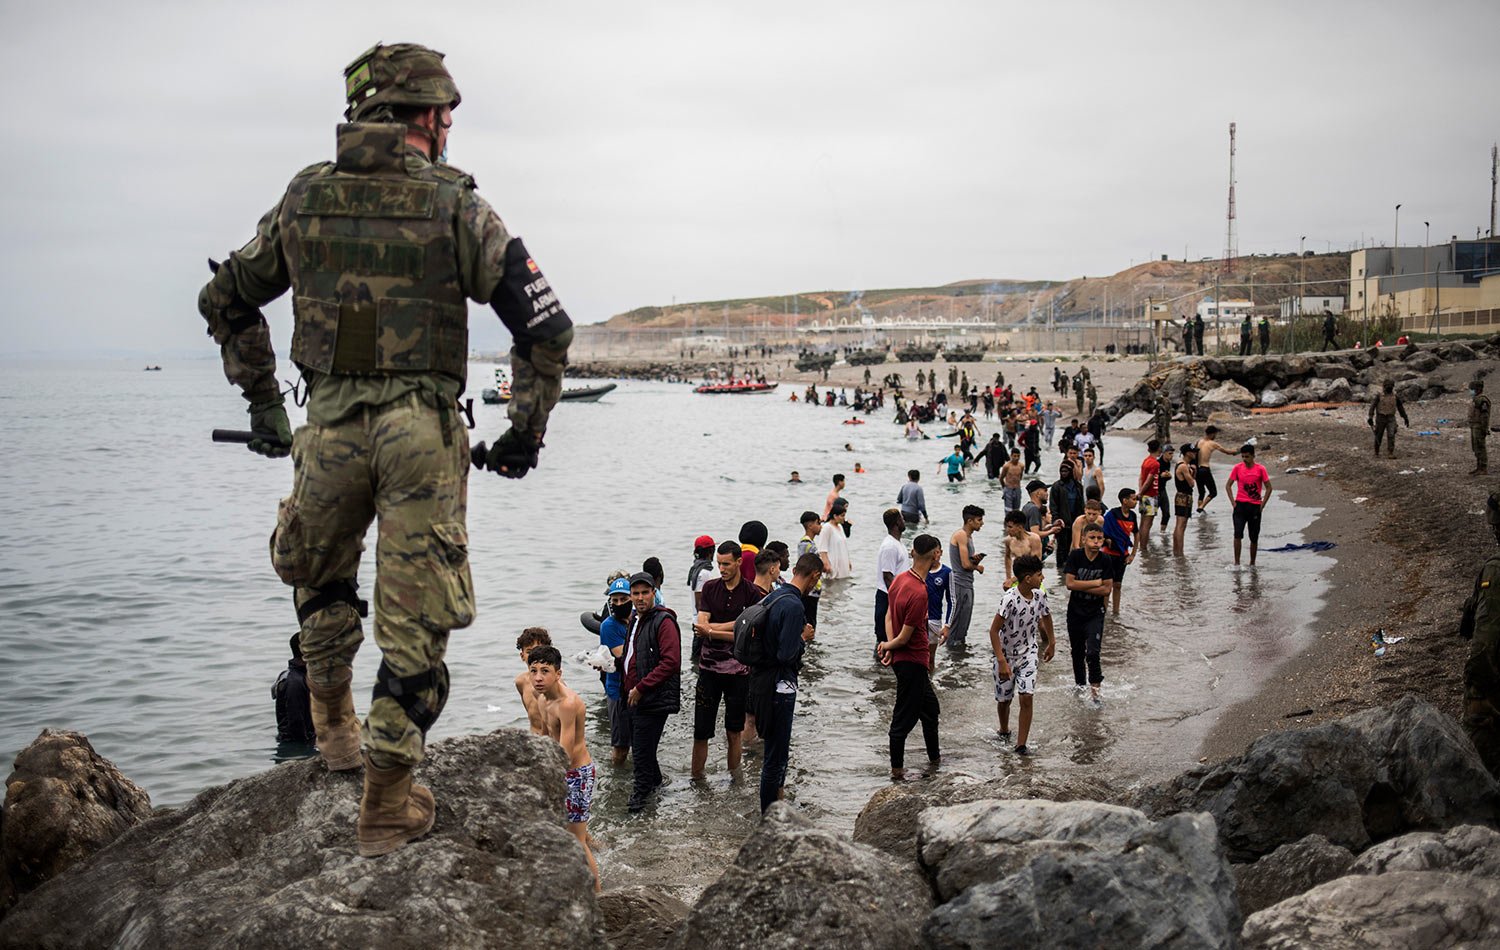  People mainly from Morocco stand on the shore as Spanish Army cordon off the area at the border of Morocco and Spain, at the Spanish enclave of Ceuta, May 18, 2021. (AP Photo/Javier Fergo) 